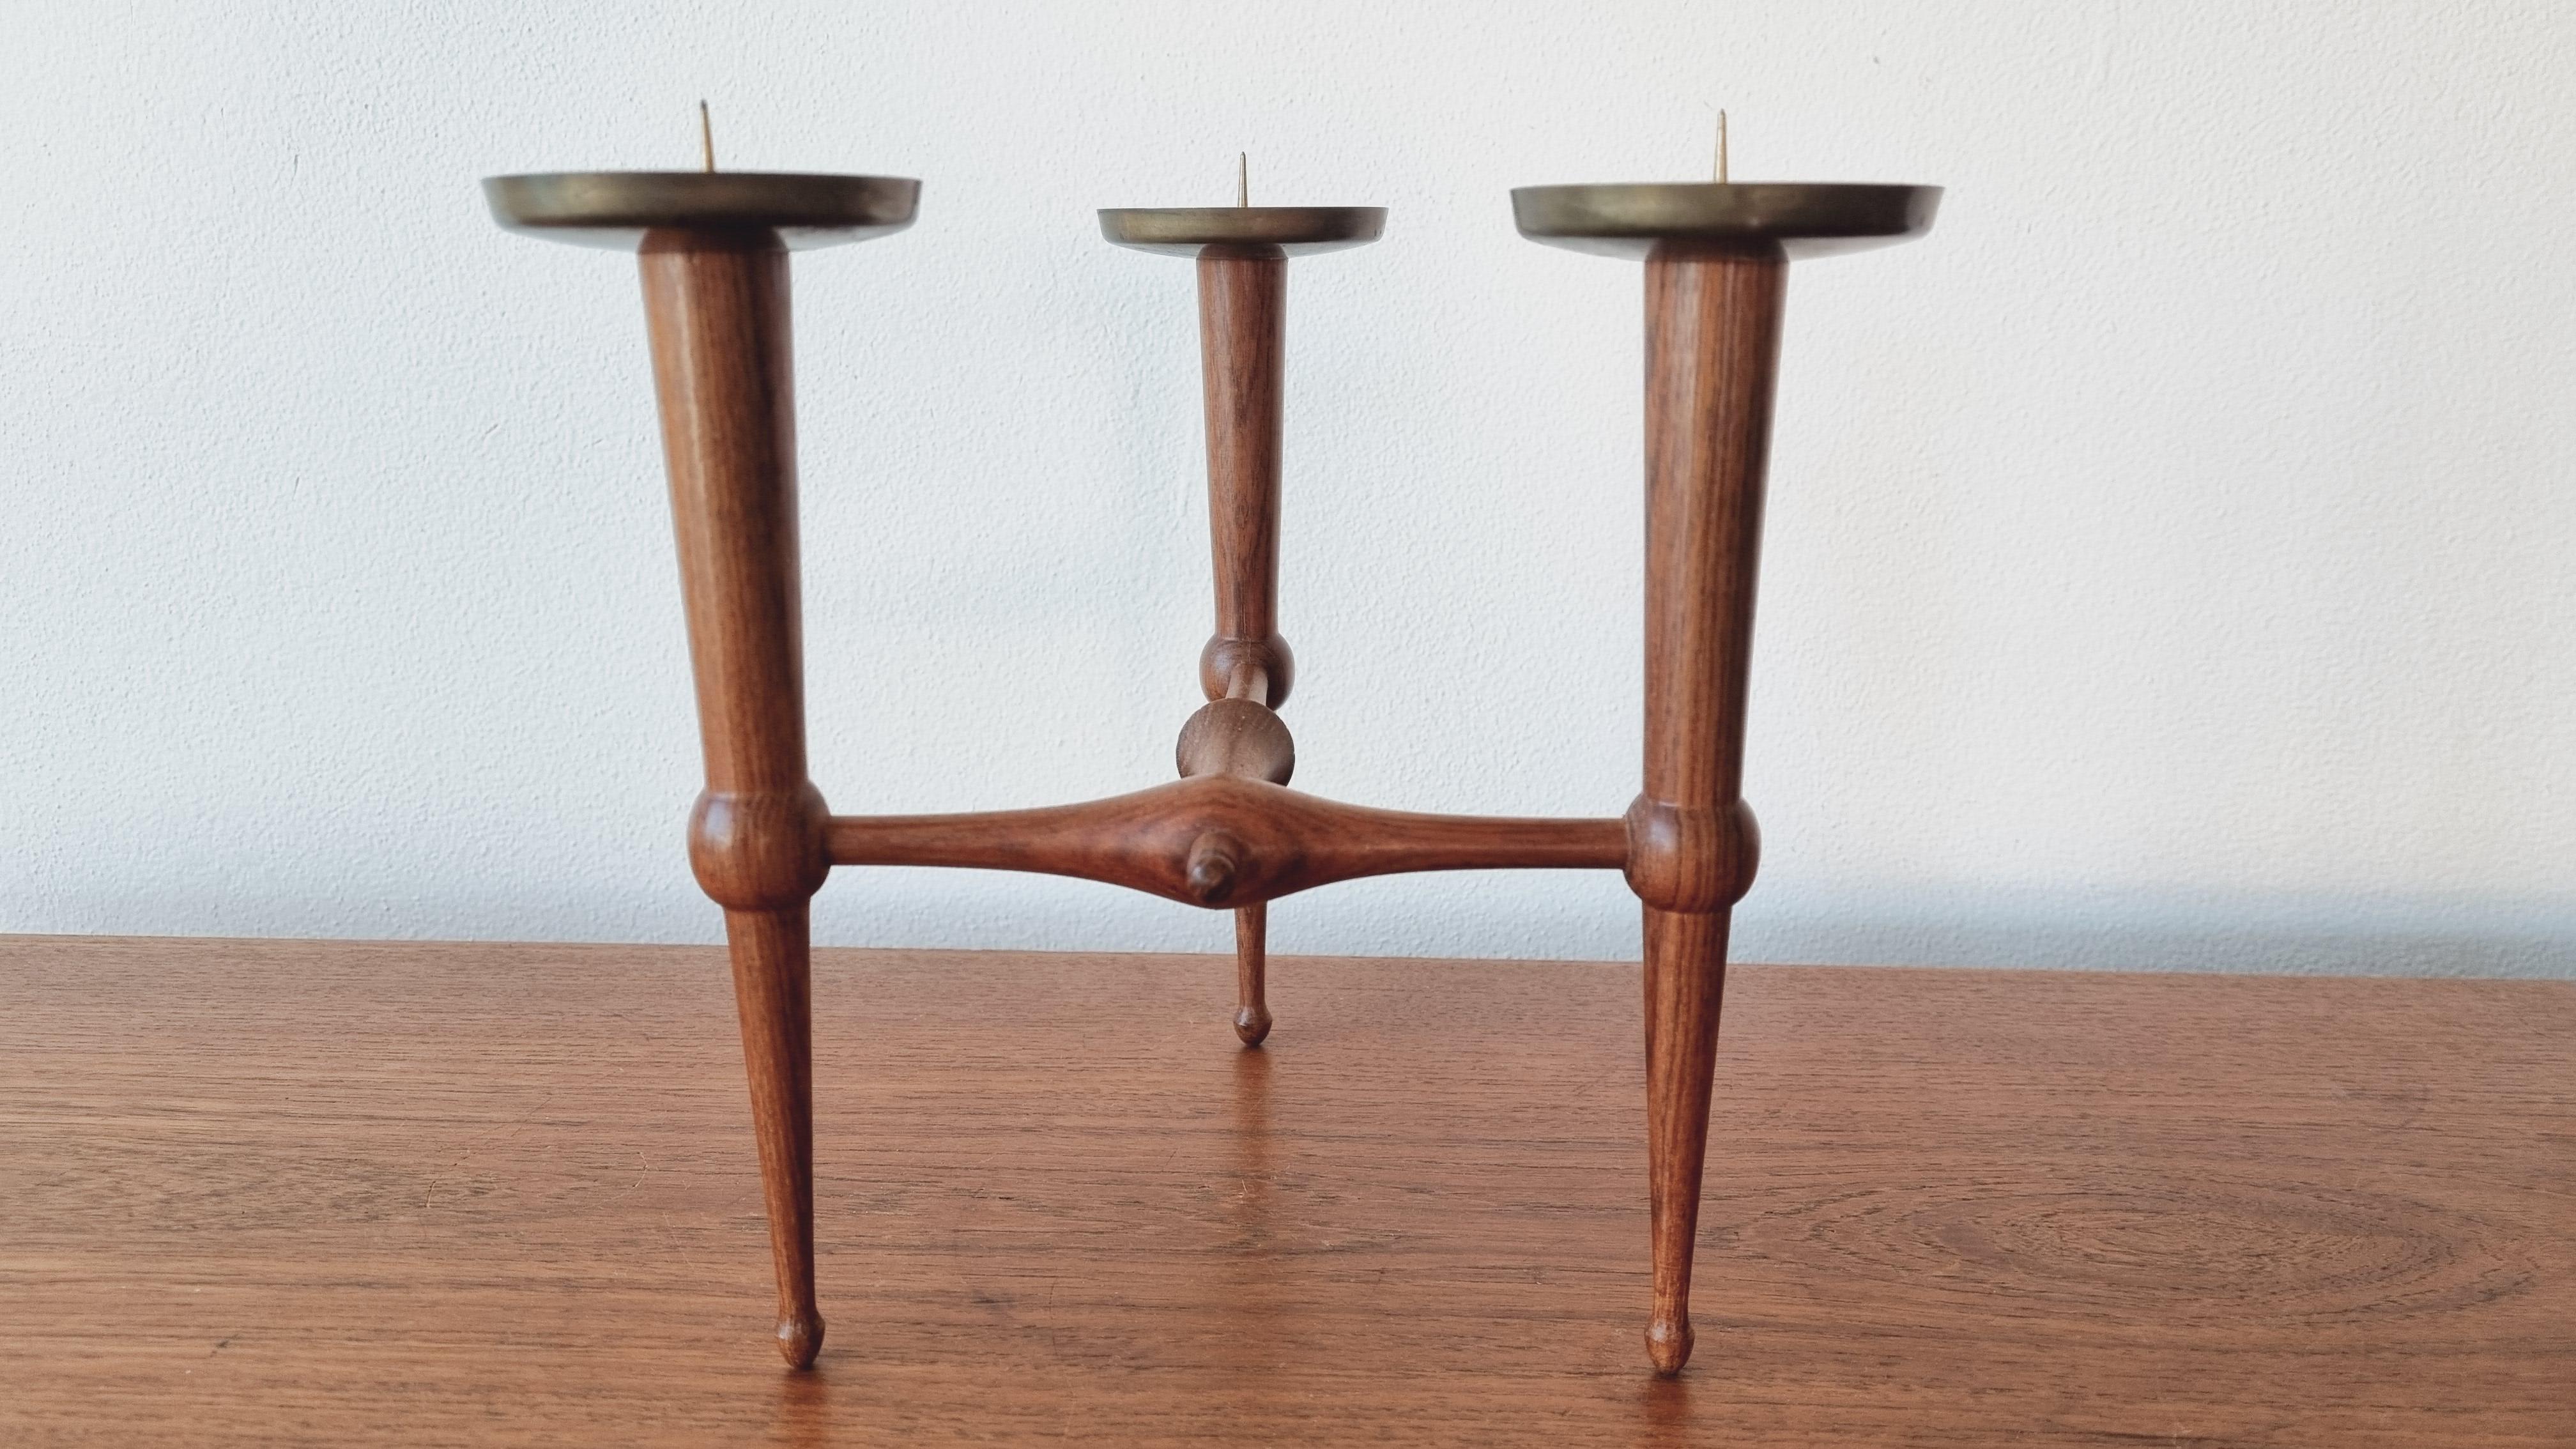 Midcentury Teak and Brass Rare Table Candle Holder / Stick, Denmark, 1960s For Sale 3